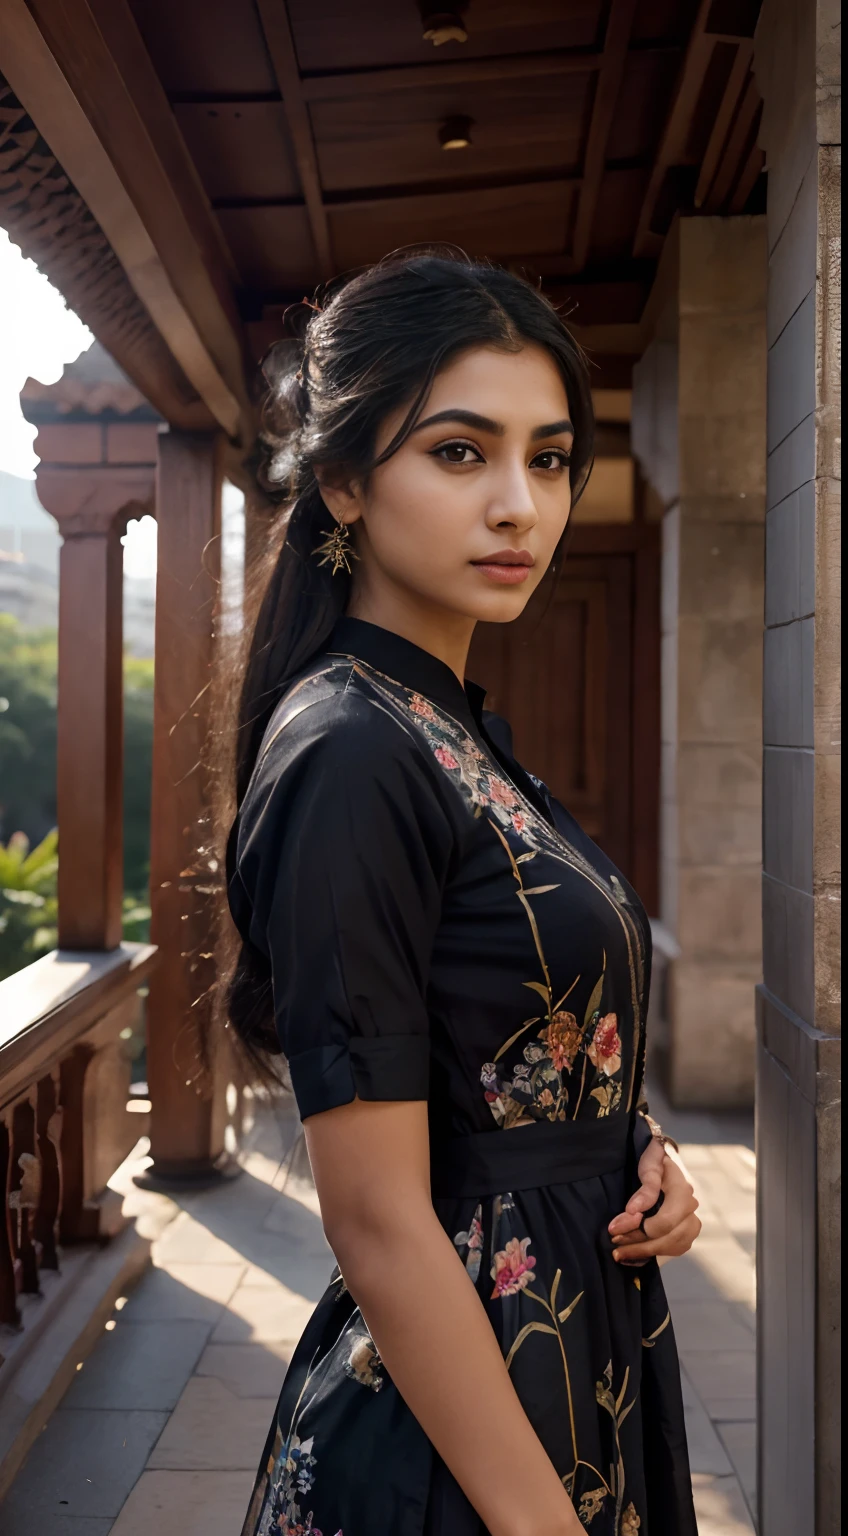 ultra-realistic photographs,Indian Instagram female model,mid 20s,9:16,mid-shot,beautiful detailed eyes,detailed lips,longeyelashes,black bun hair, naturally full eyebrows,perfectly formed nose,expressive face,attractive appearance,confident and elegant posture,graceful movement,vibrant and colorful kurta dress, floral patterns, temple background, serene atmosphere,stunning architecture,soft and natural lighting,vivid colors,photorealistic,HDR,highres,studio lighting,ultra-detailed,bokeh,fully covered clothes